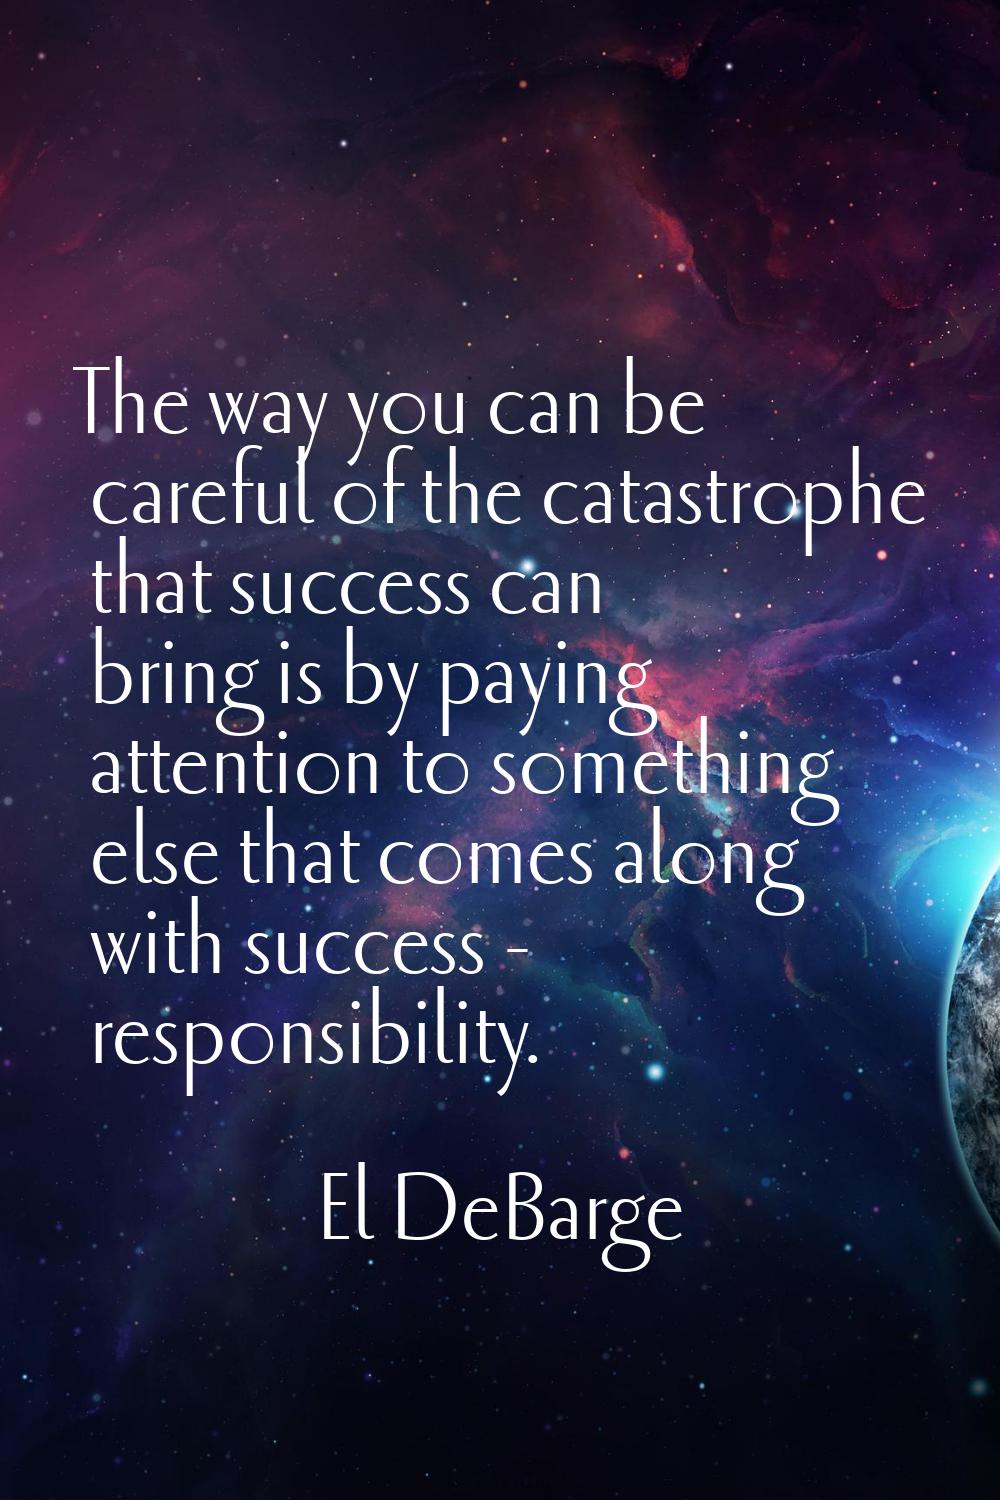 The way you can be careful of the catastrophe that success can bring is by paying attention to some